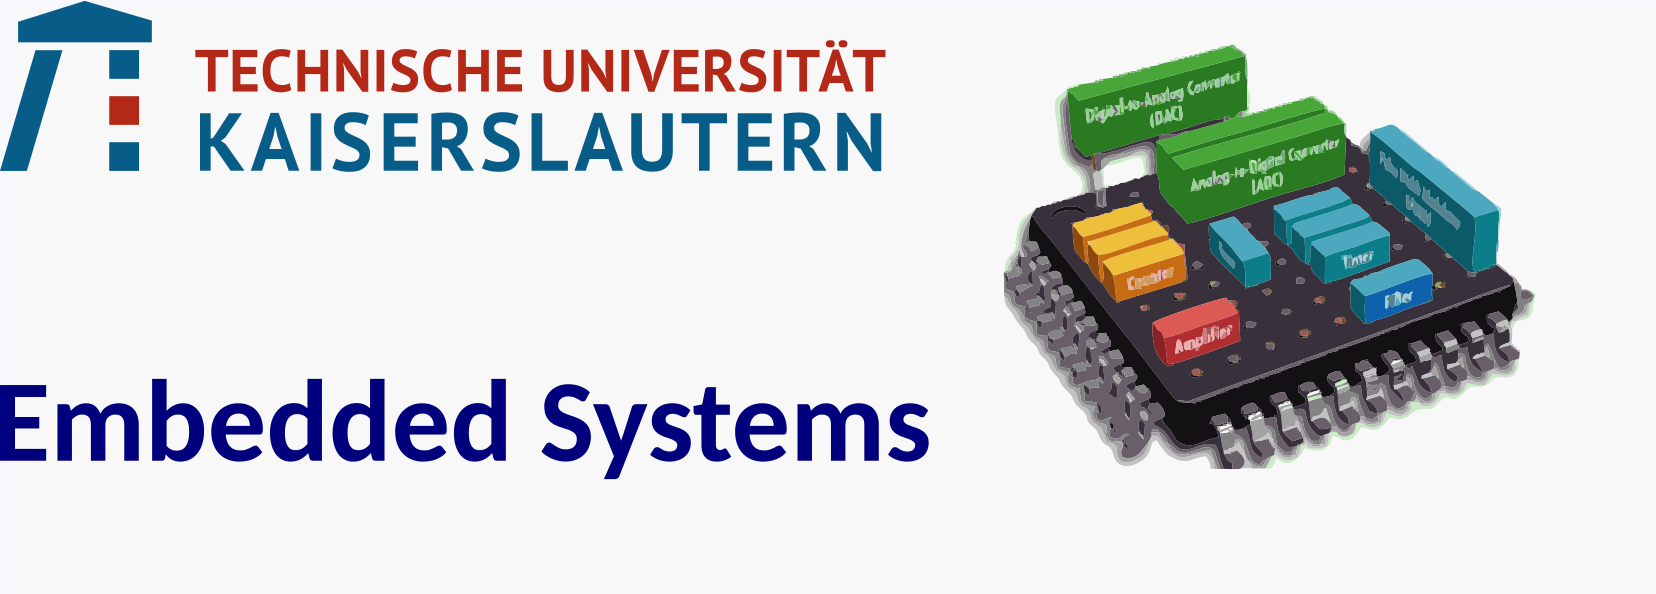 Embeeded Systems - GRIAT double degree